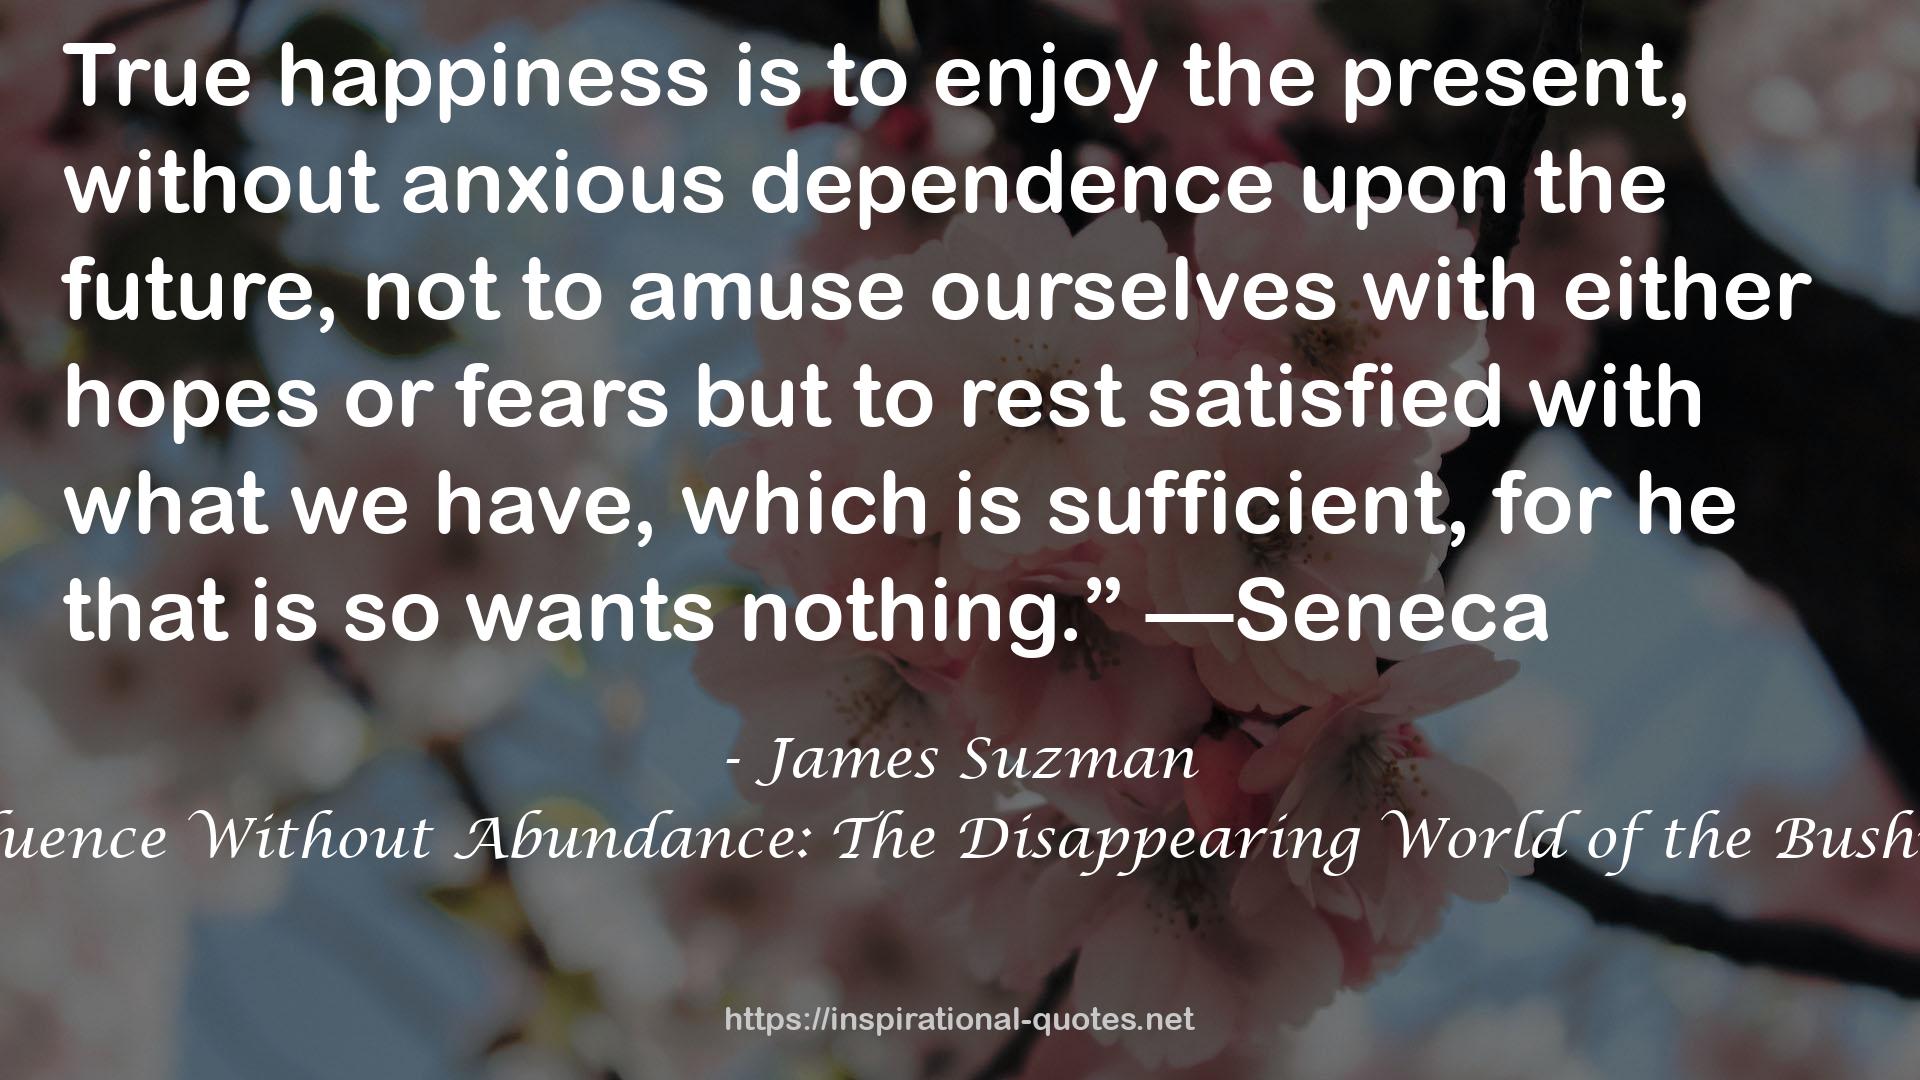 Affluence Without Abundance: The Disappearing World of the Bushmen QUOTES